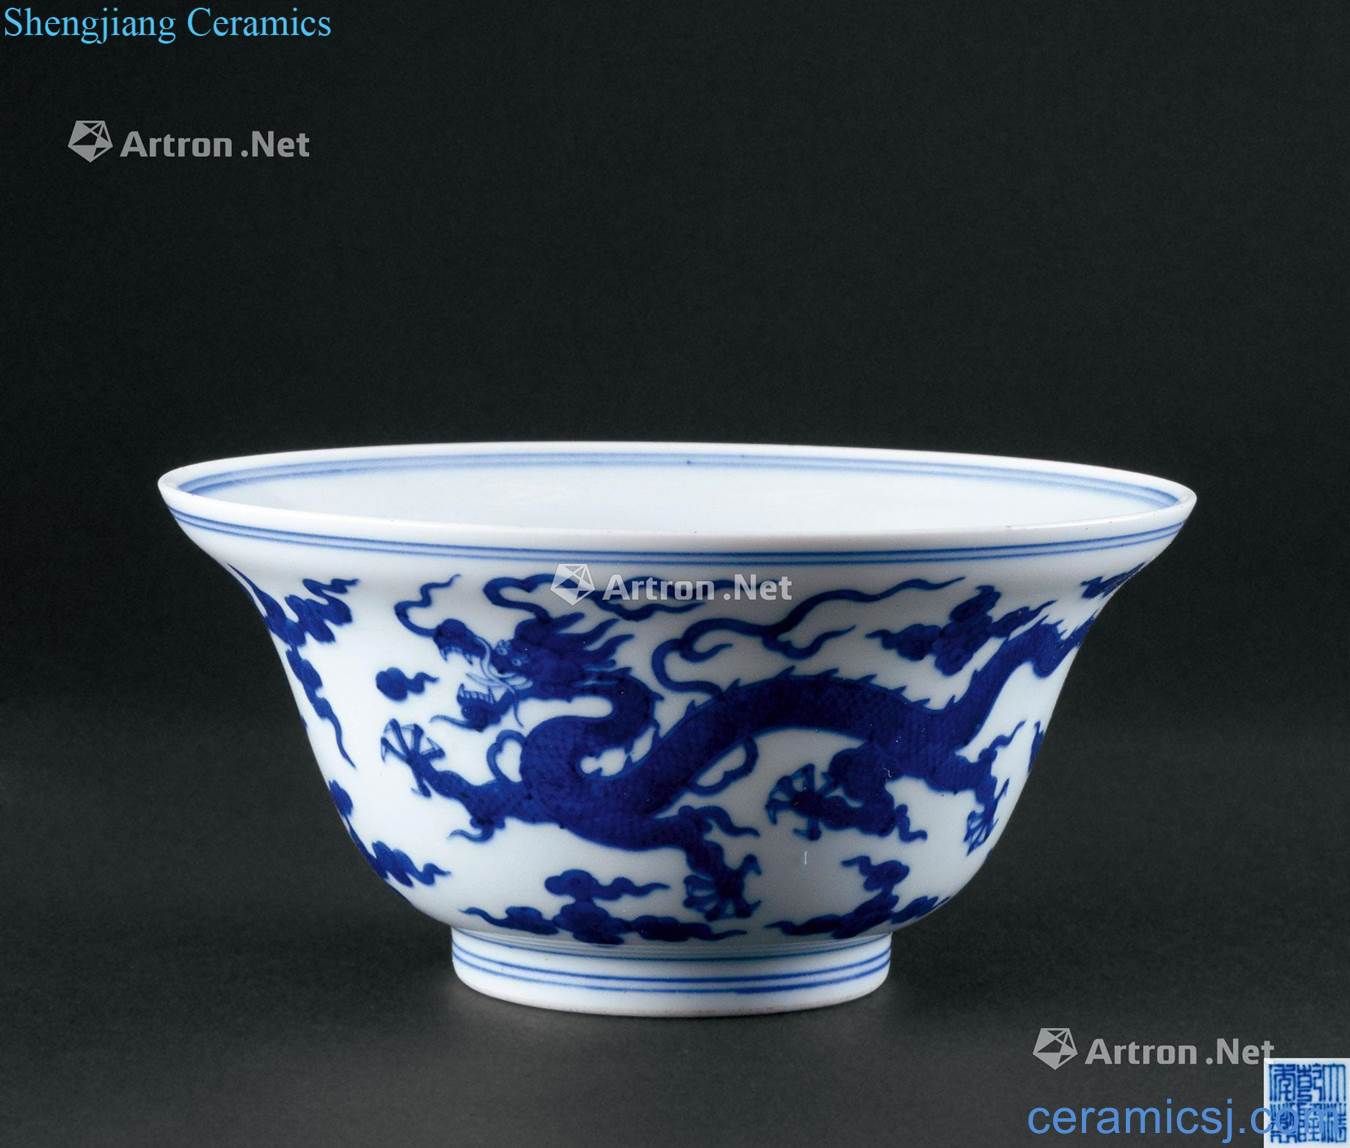 In the qing dynasty (1644-1911) blue and white praised grain or bowl